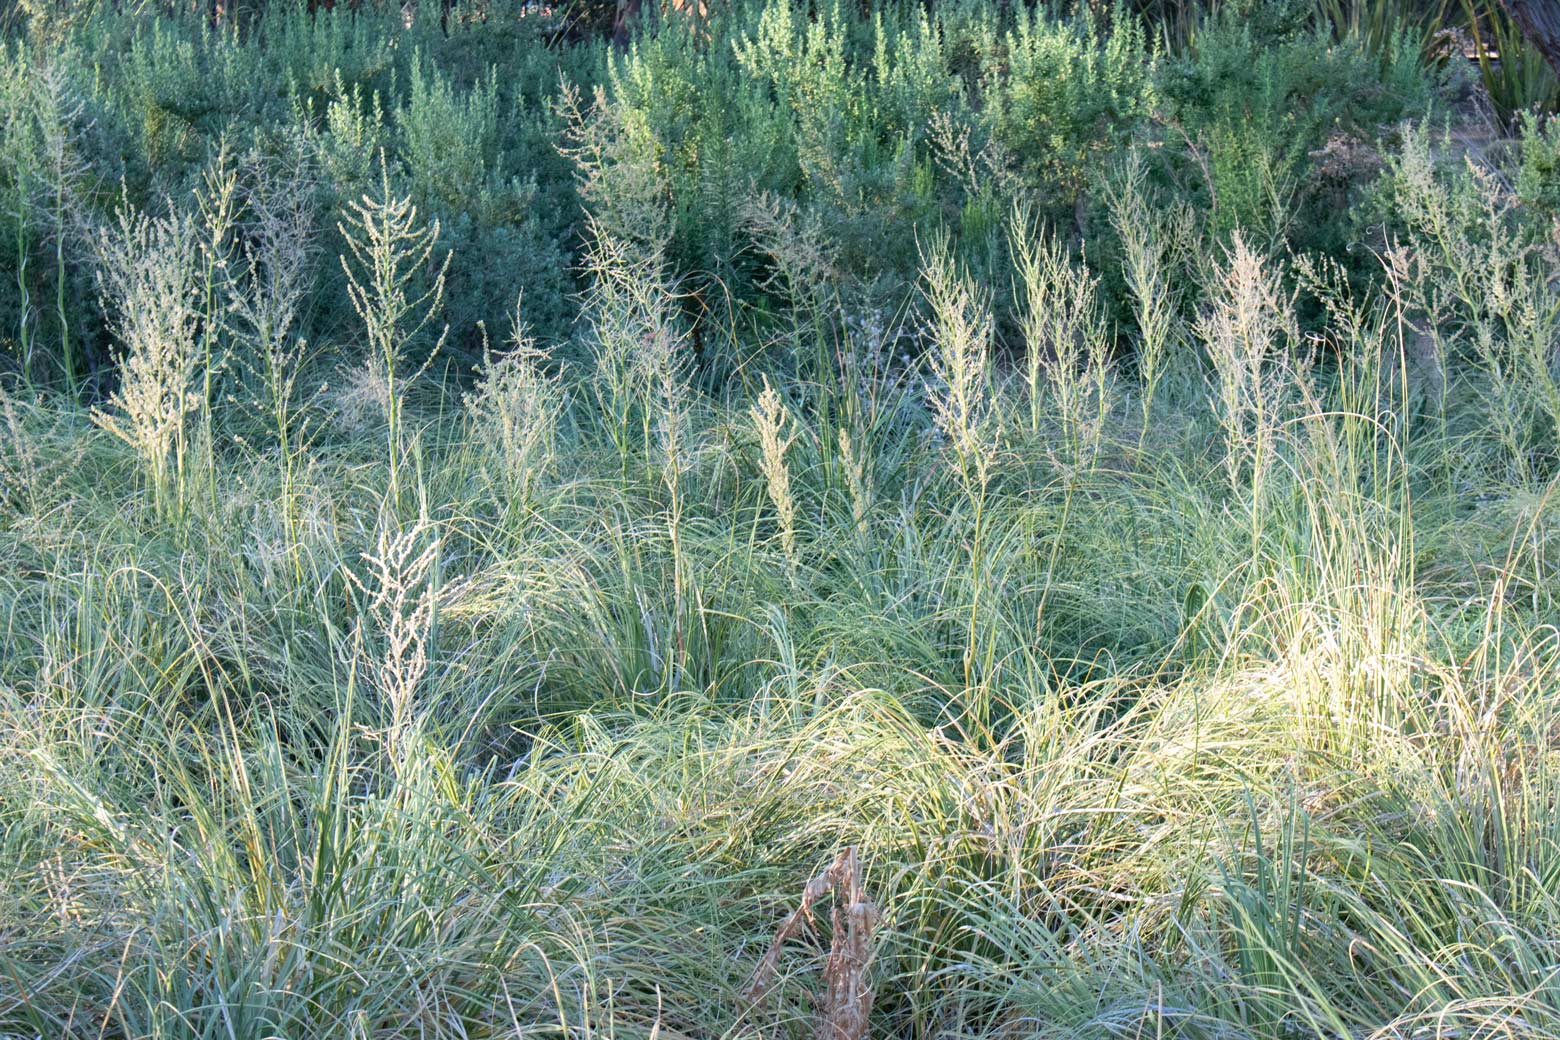 A group Texas Bear Grasses blooming.